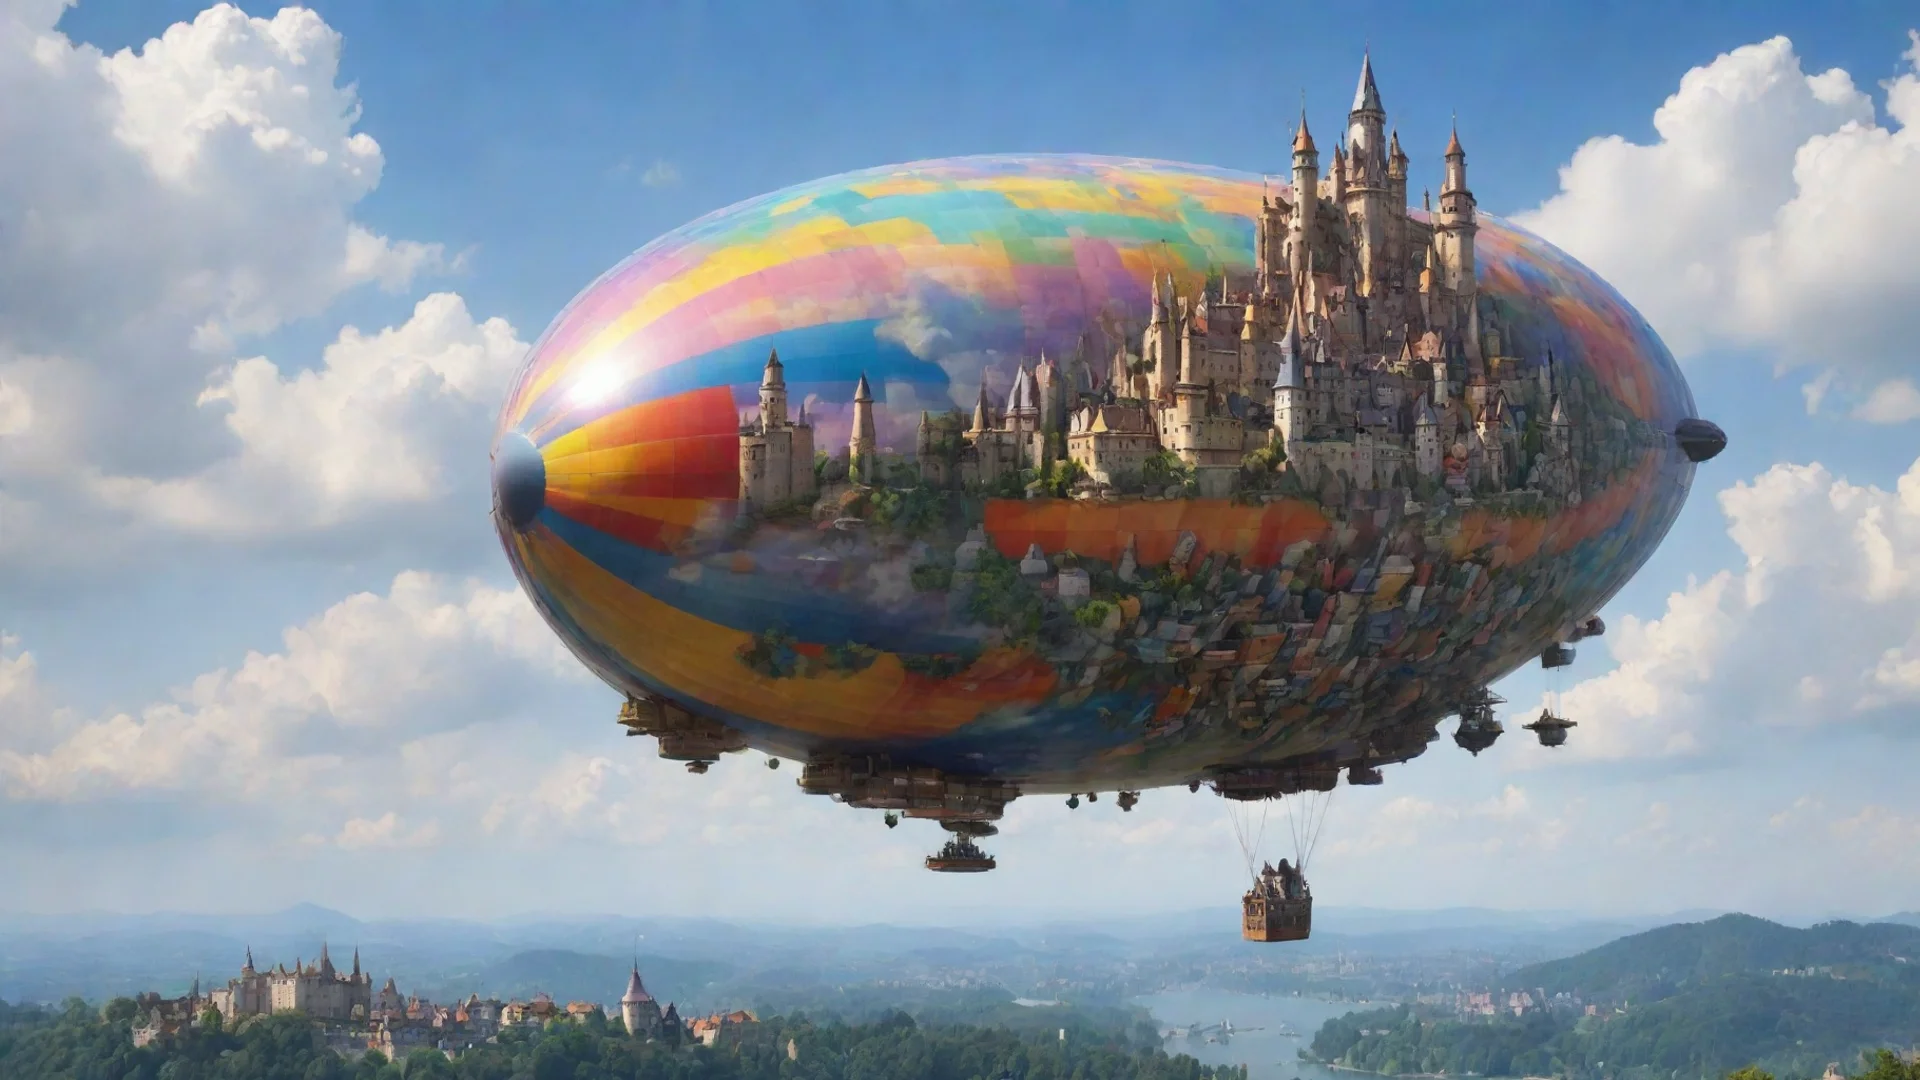 amazing castle in sky amazing awesome architectural masterpiece wow hd colorful world floating blimp awesome portrait 2 wide